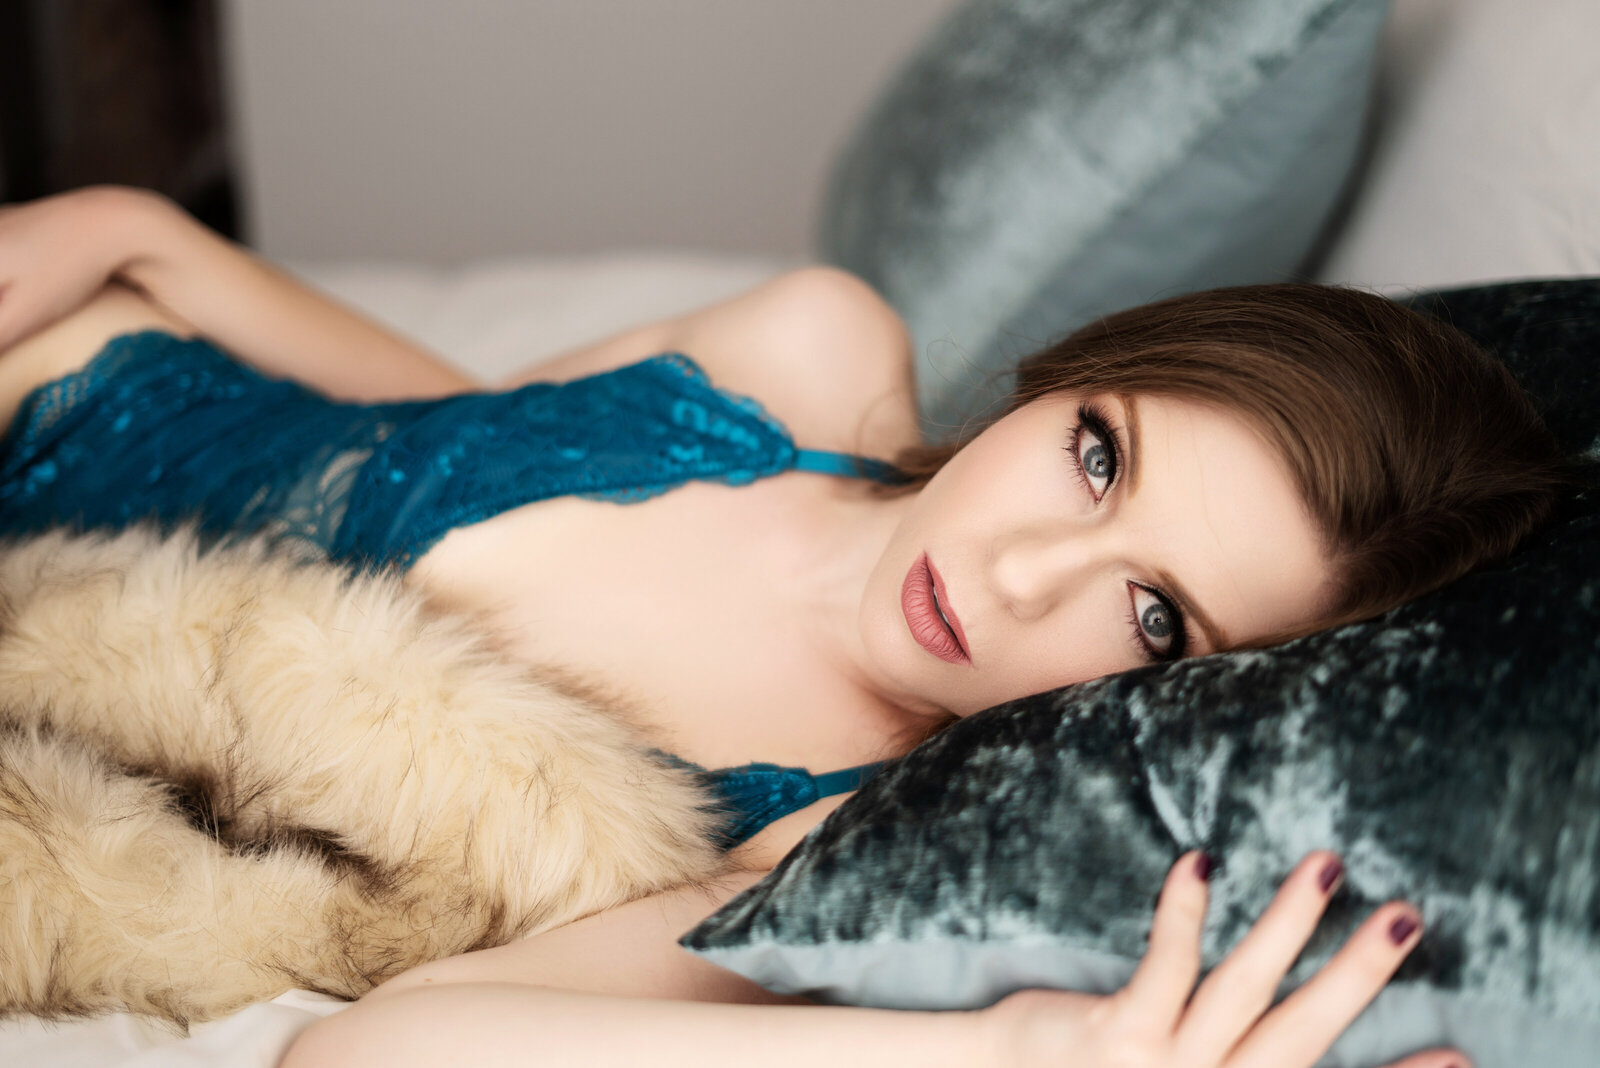 blue eyed woman laying on bed looking at the camera in teal lingerie